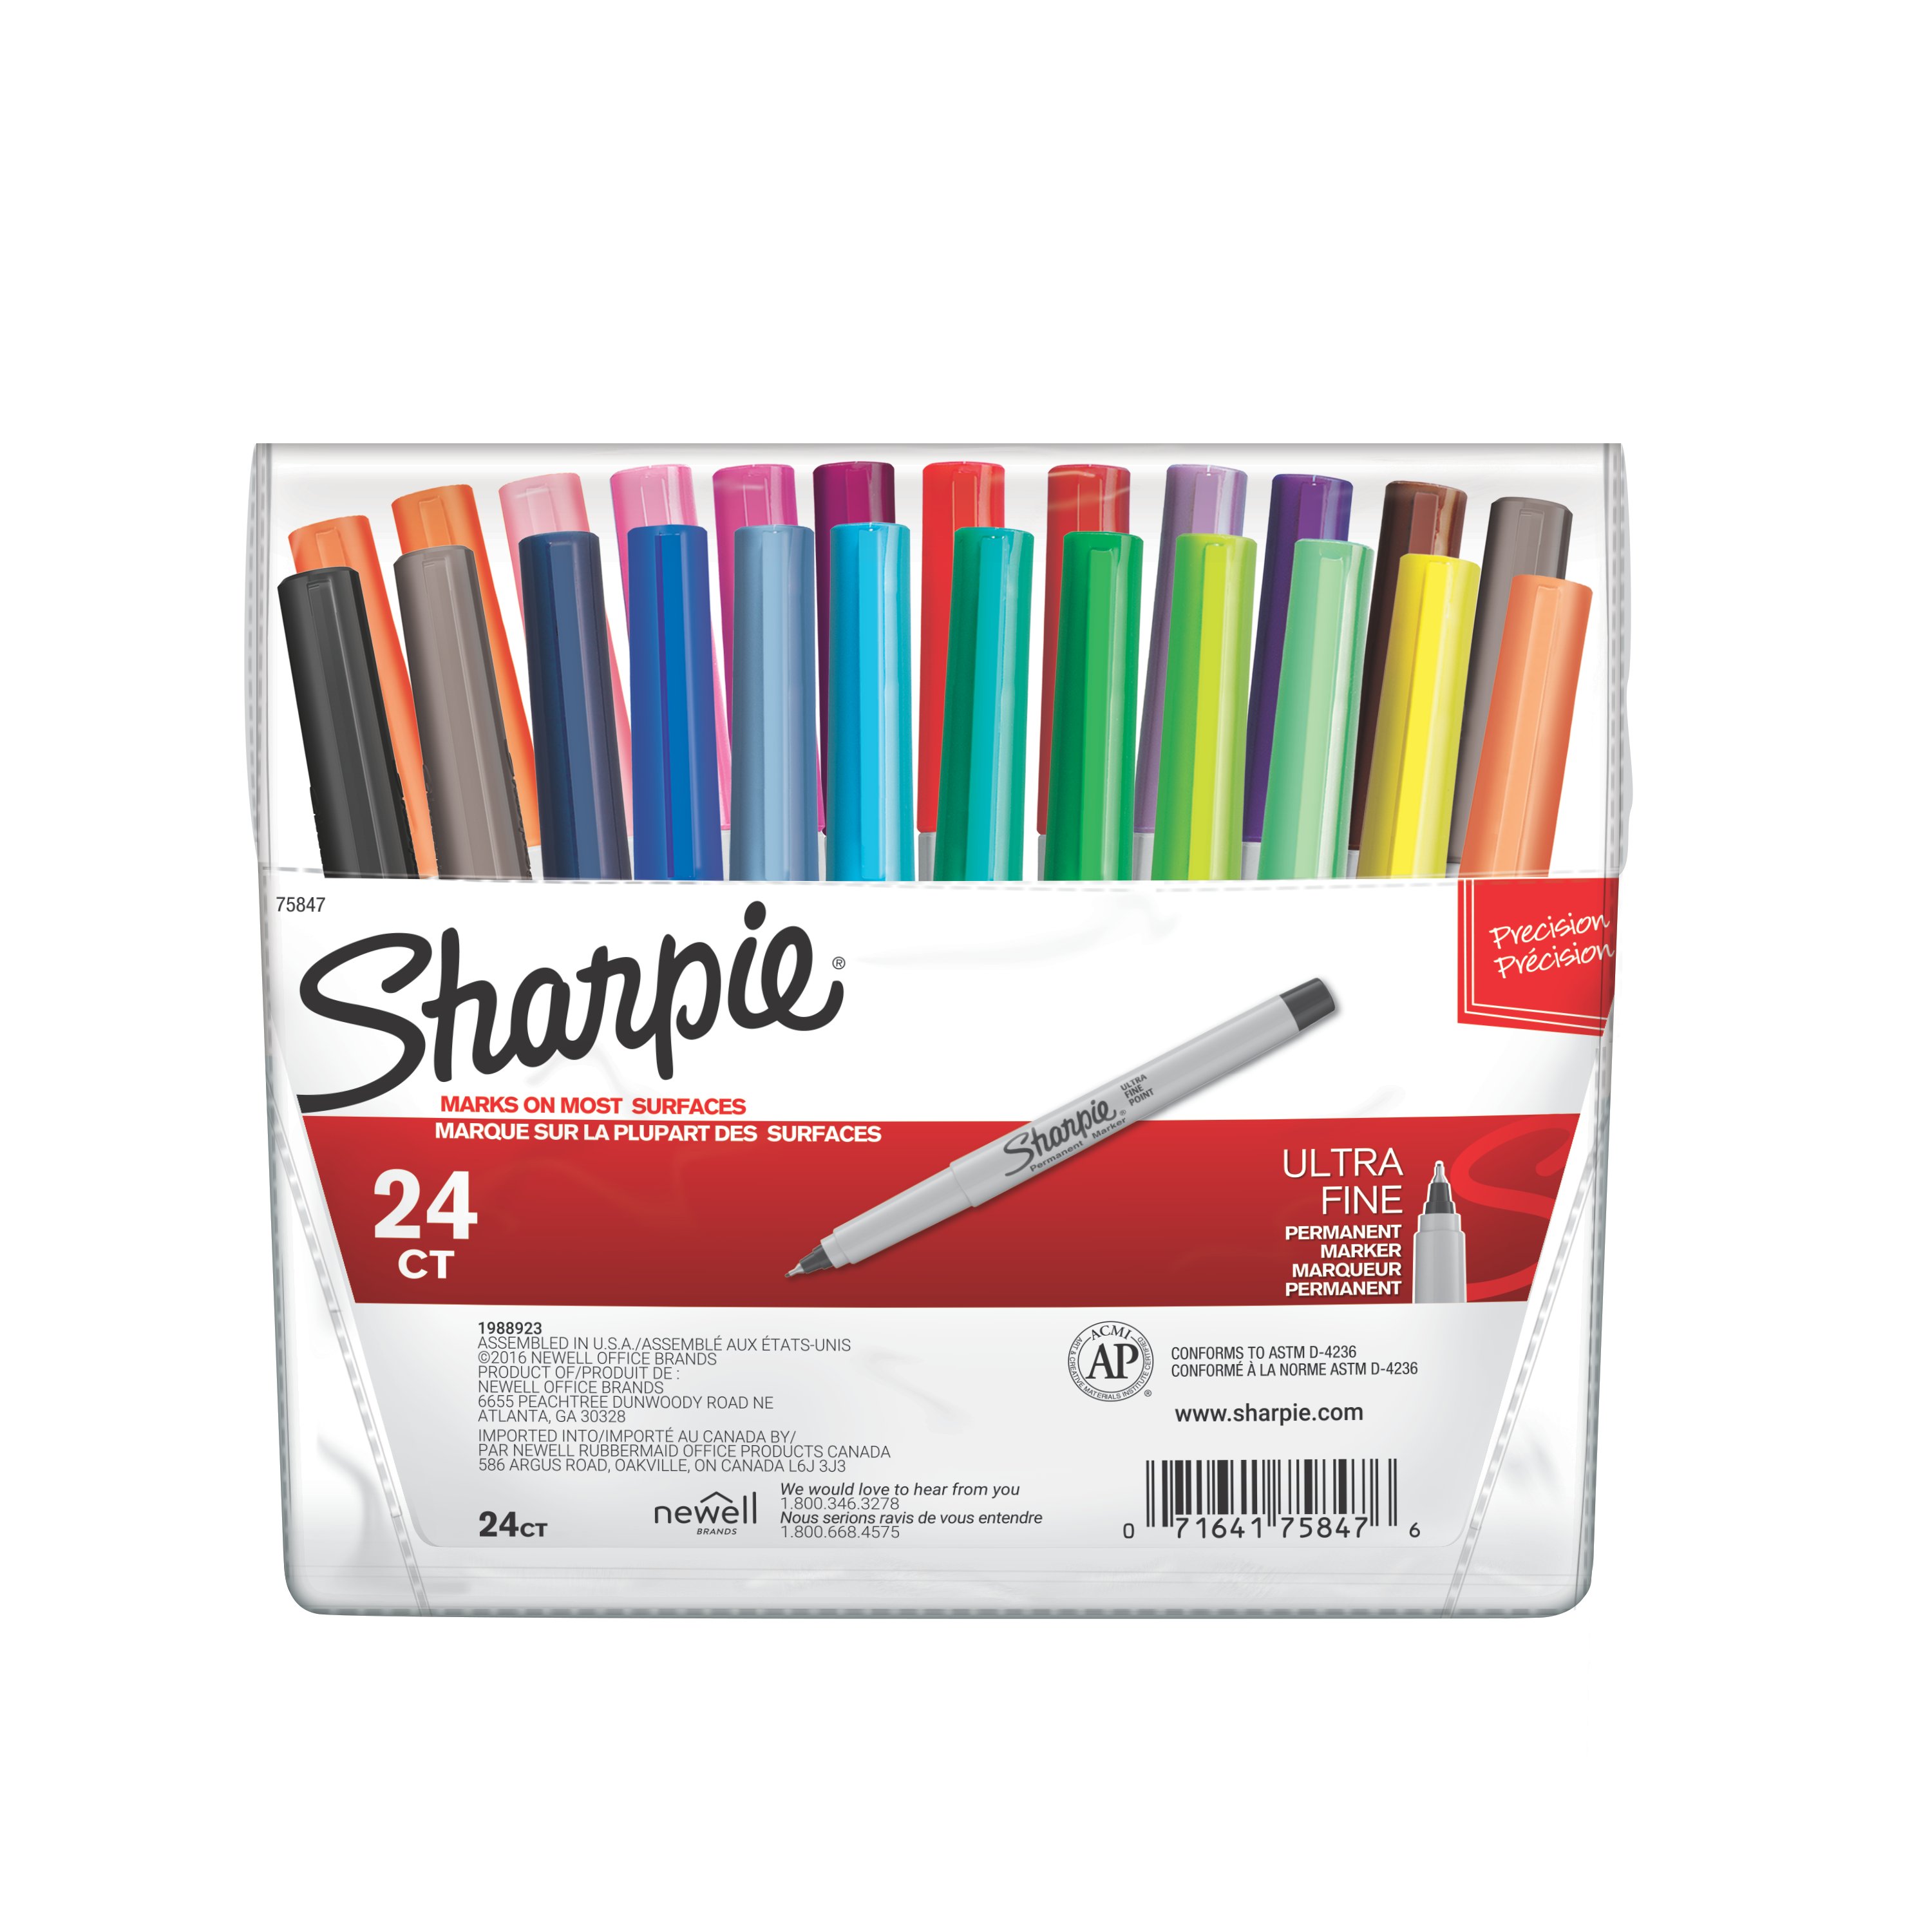 SHARPIE Permanent Markers, Ultra Fine Point, Black, 12 Count